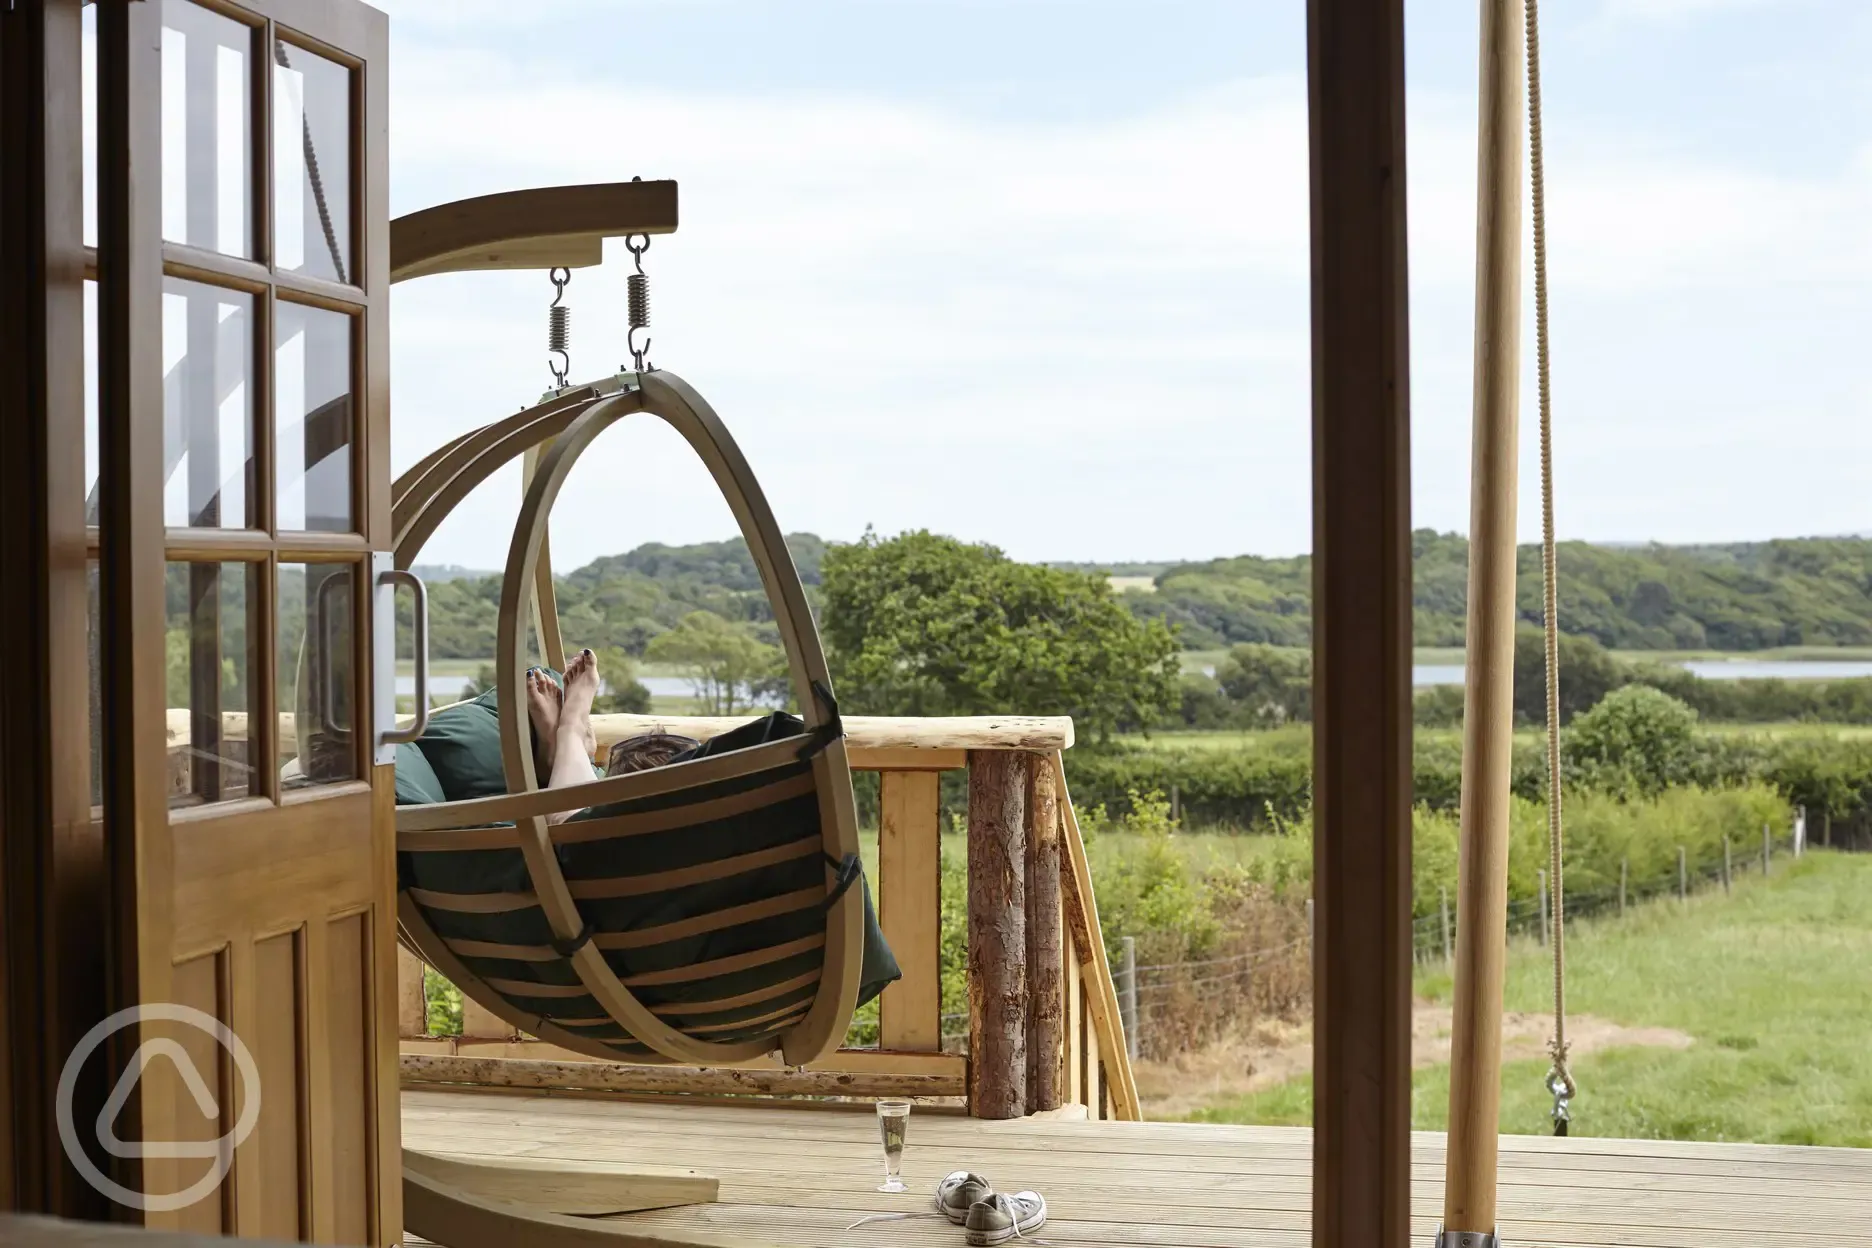 Sway in our swinging sofa. Enjoy countryside, river views.